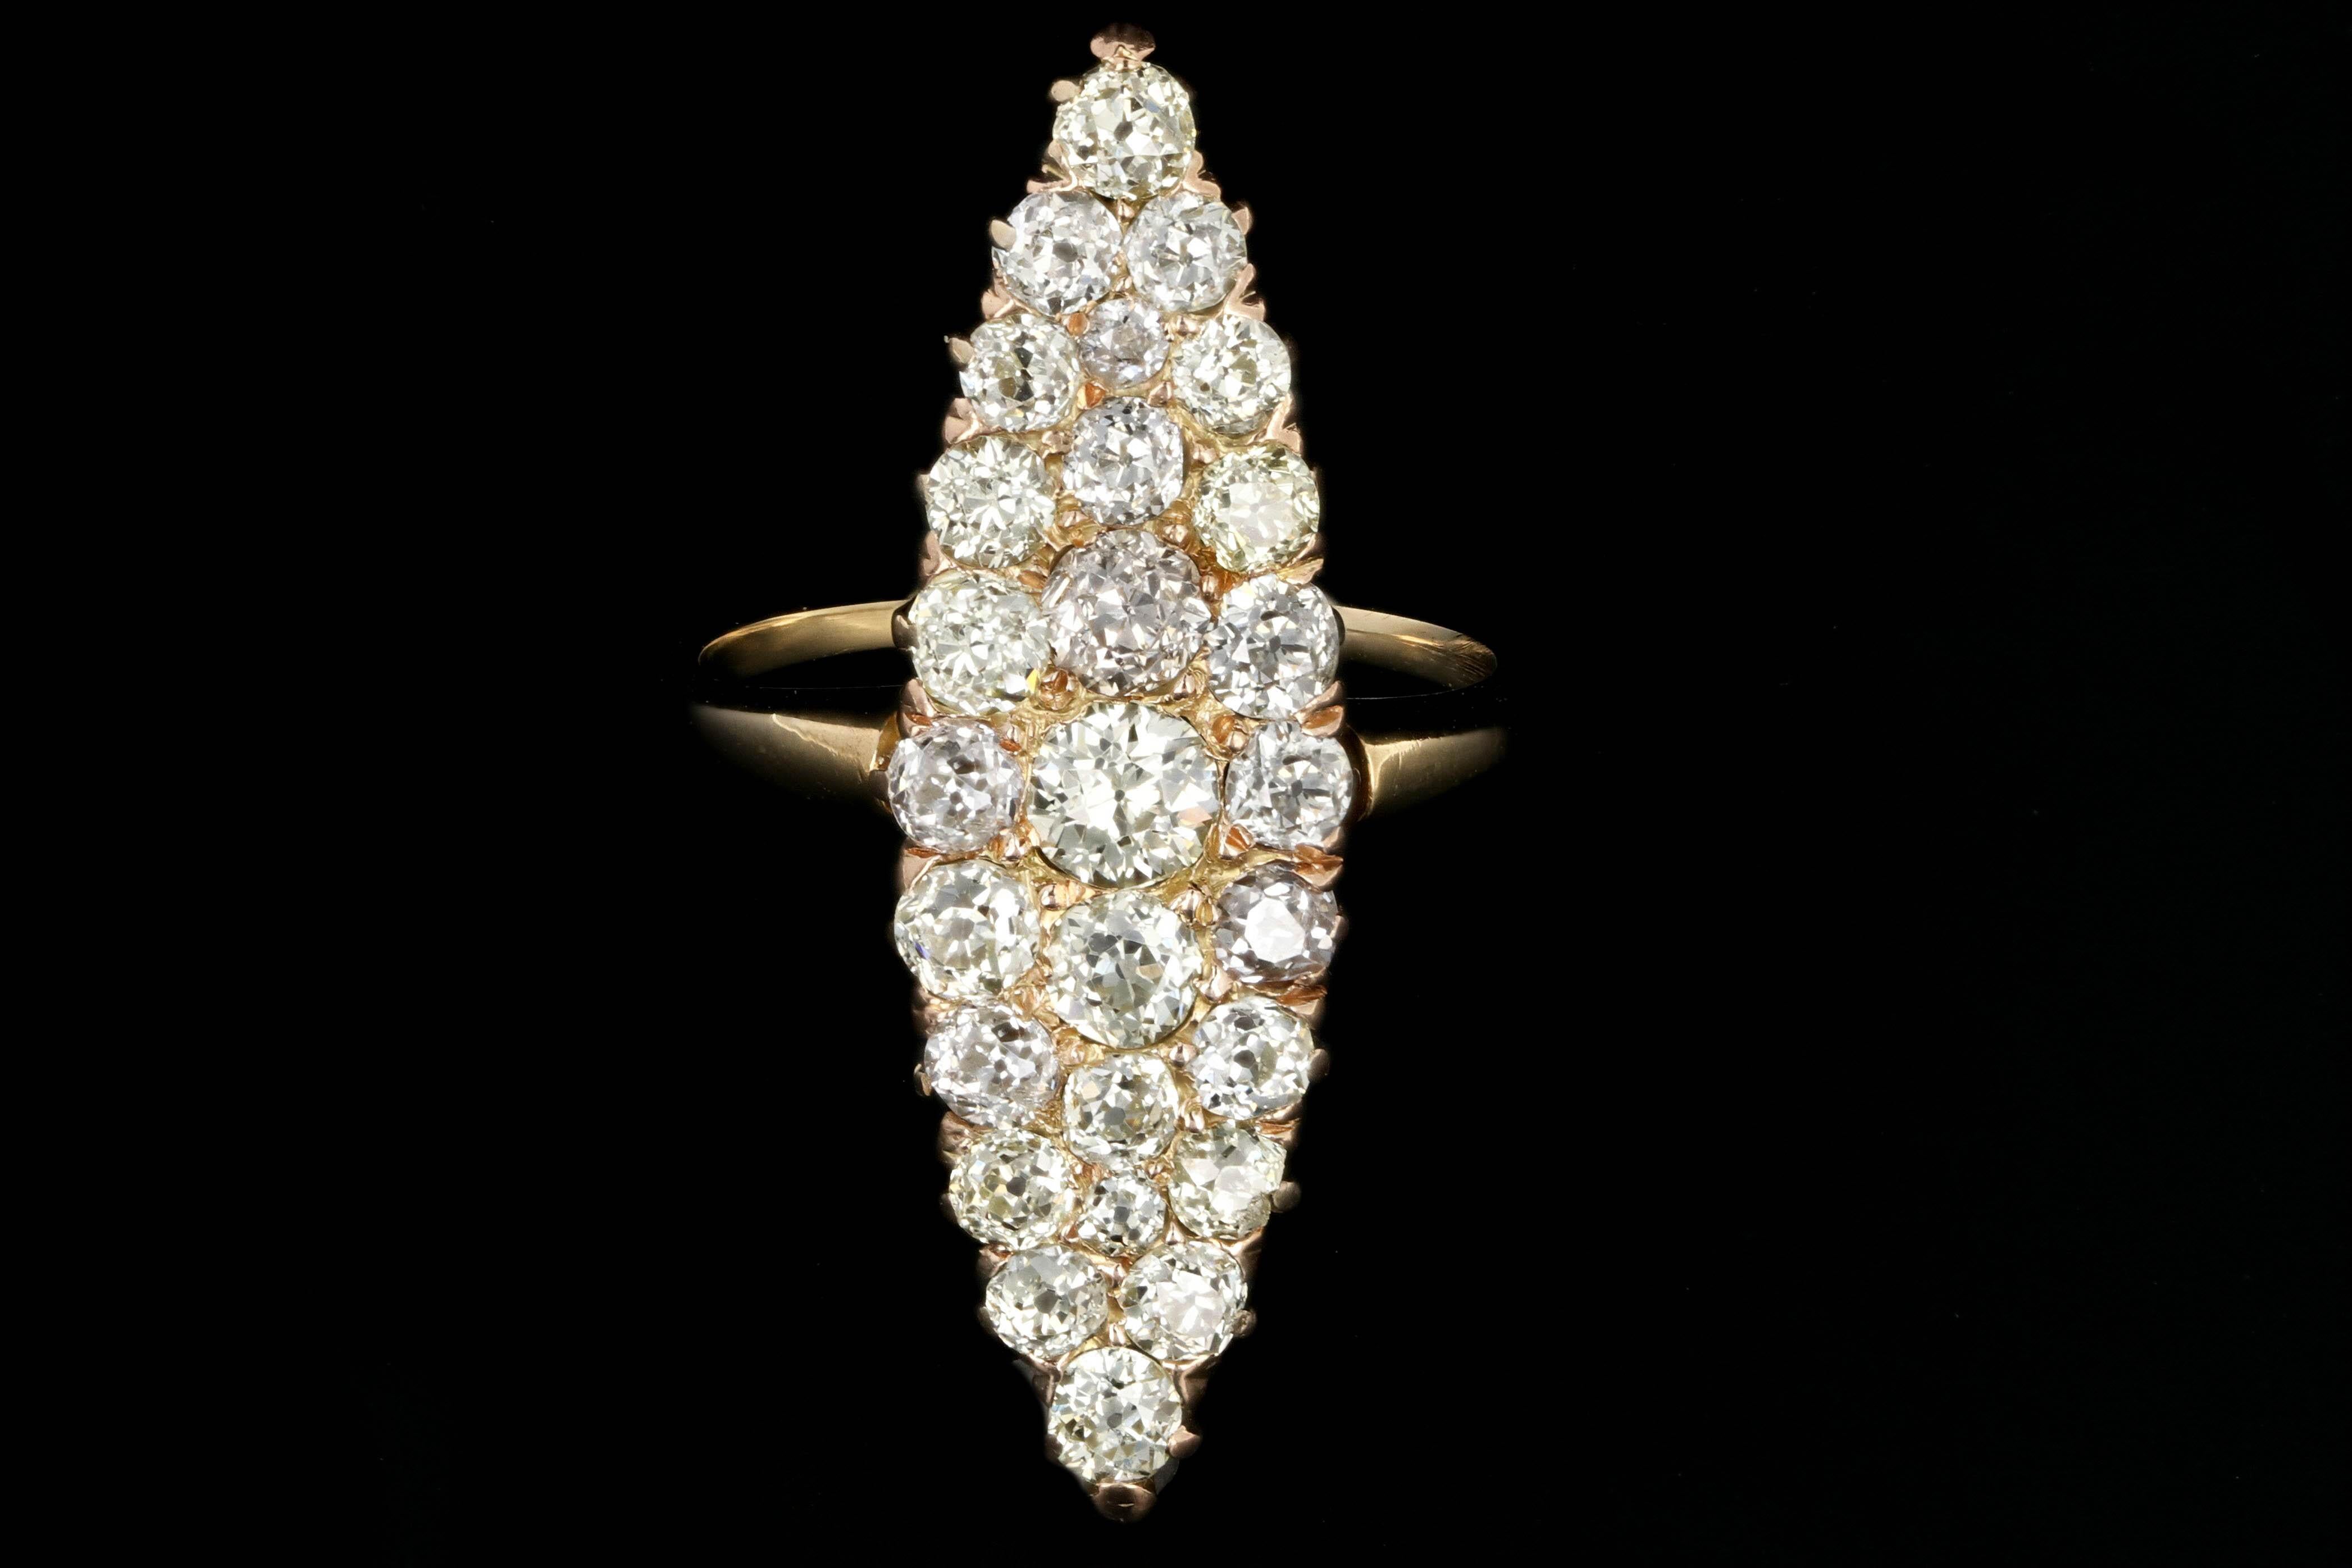 Era: Victorian

Composition: 18K Yellow Gold

Primary Stone: Old Cut Diamonds

Carat Weight: Approximately 4 Carats

Color: J-L

Clarity: Vs2-SI1

Ring Weight:  3.1 DWT

Ring Size: 6.5

Ring Height: 35mm

Ring Width:15mm